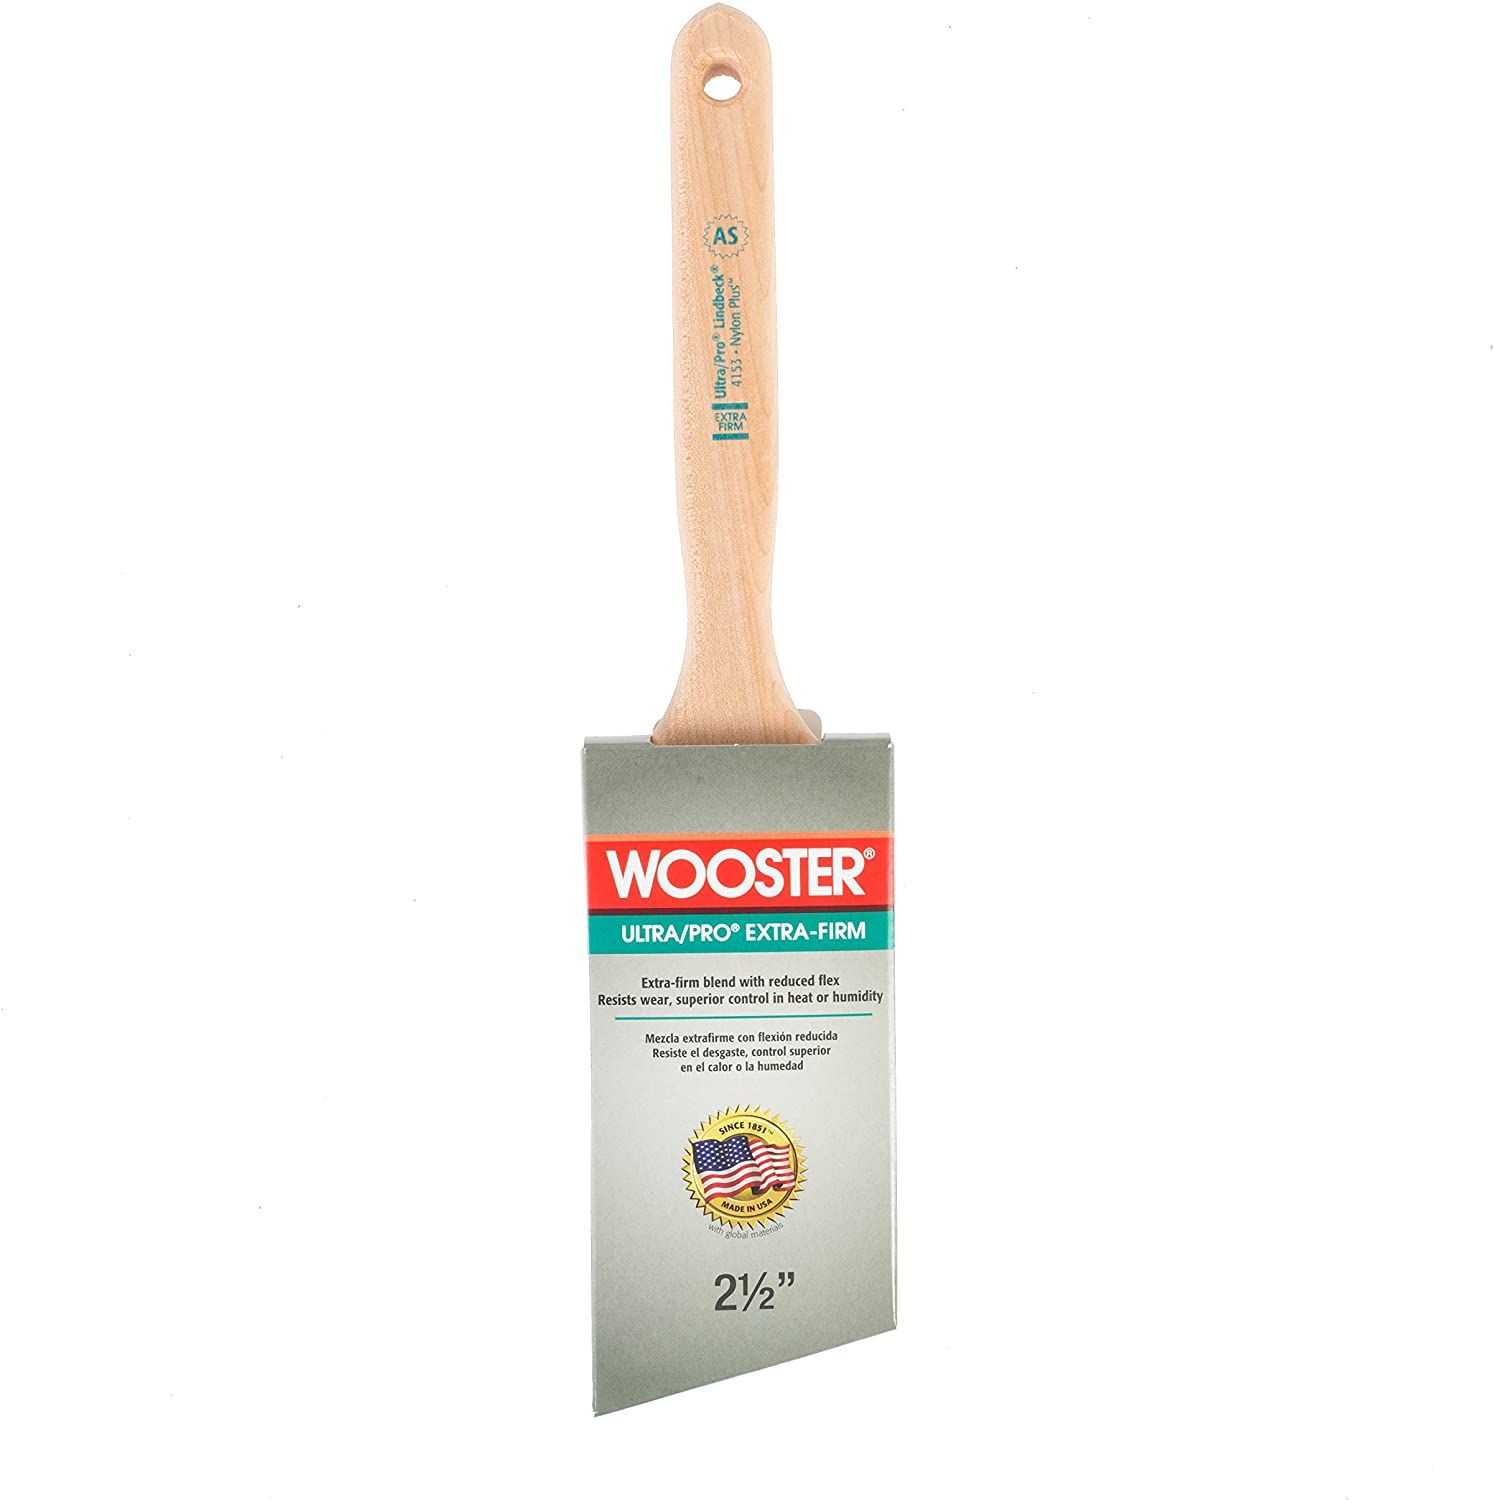 Wooster Ultra/Pro Extra-Firm Lindbeck Angle Sash Paintbrush